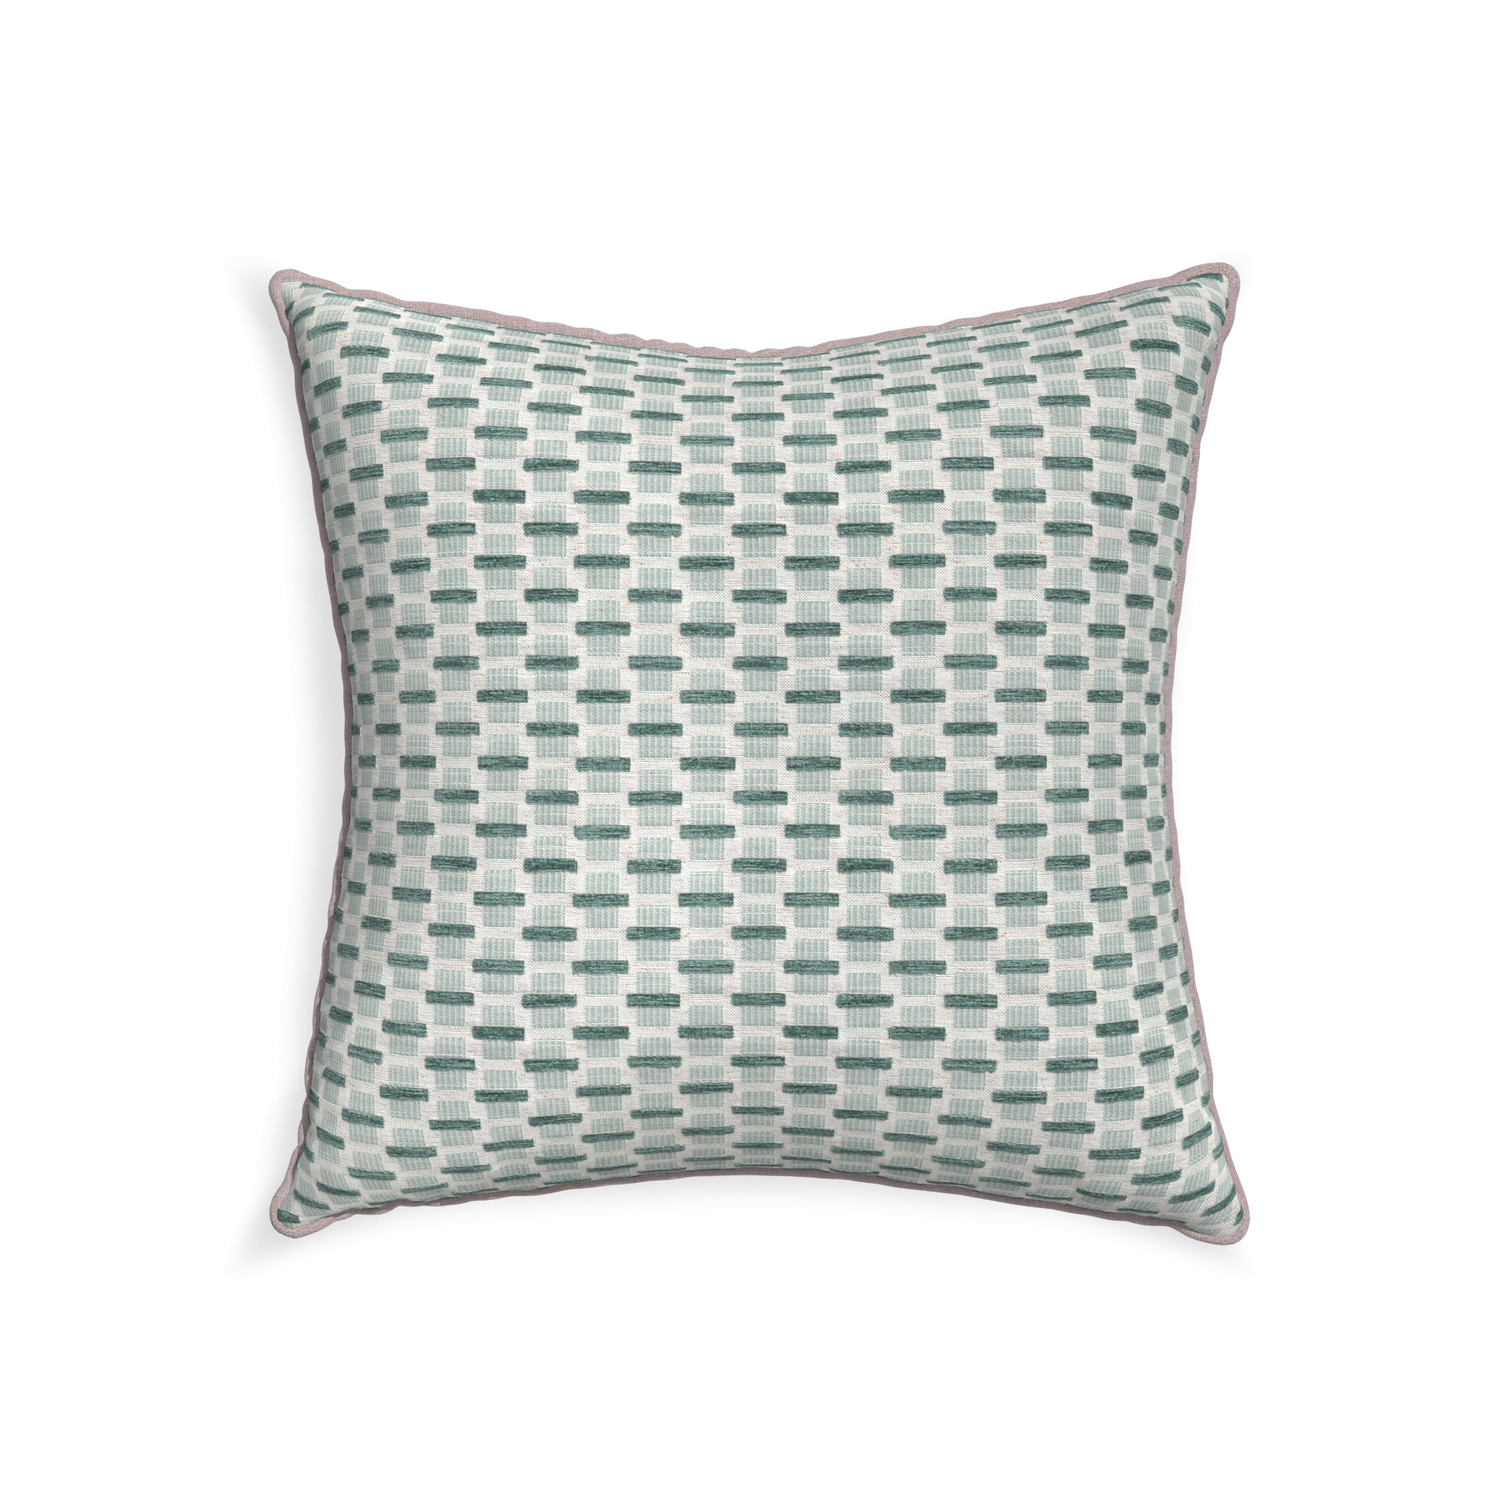 22-square willow mint custom green geometric chenillepillow with orchid piping on white background